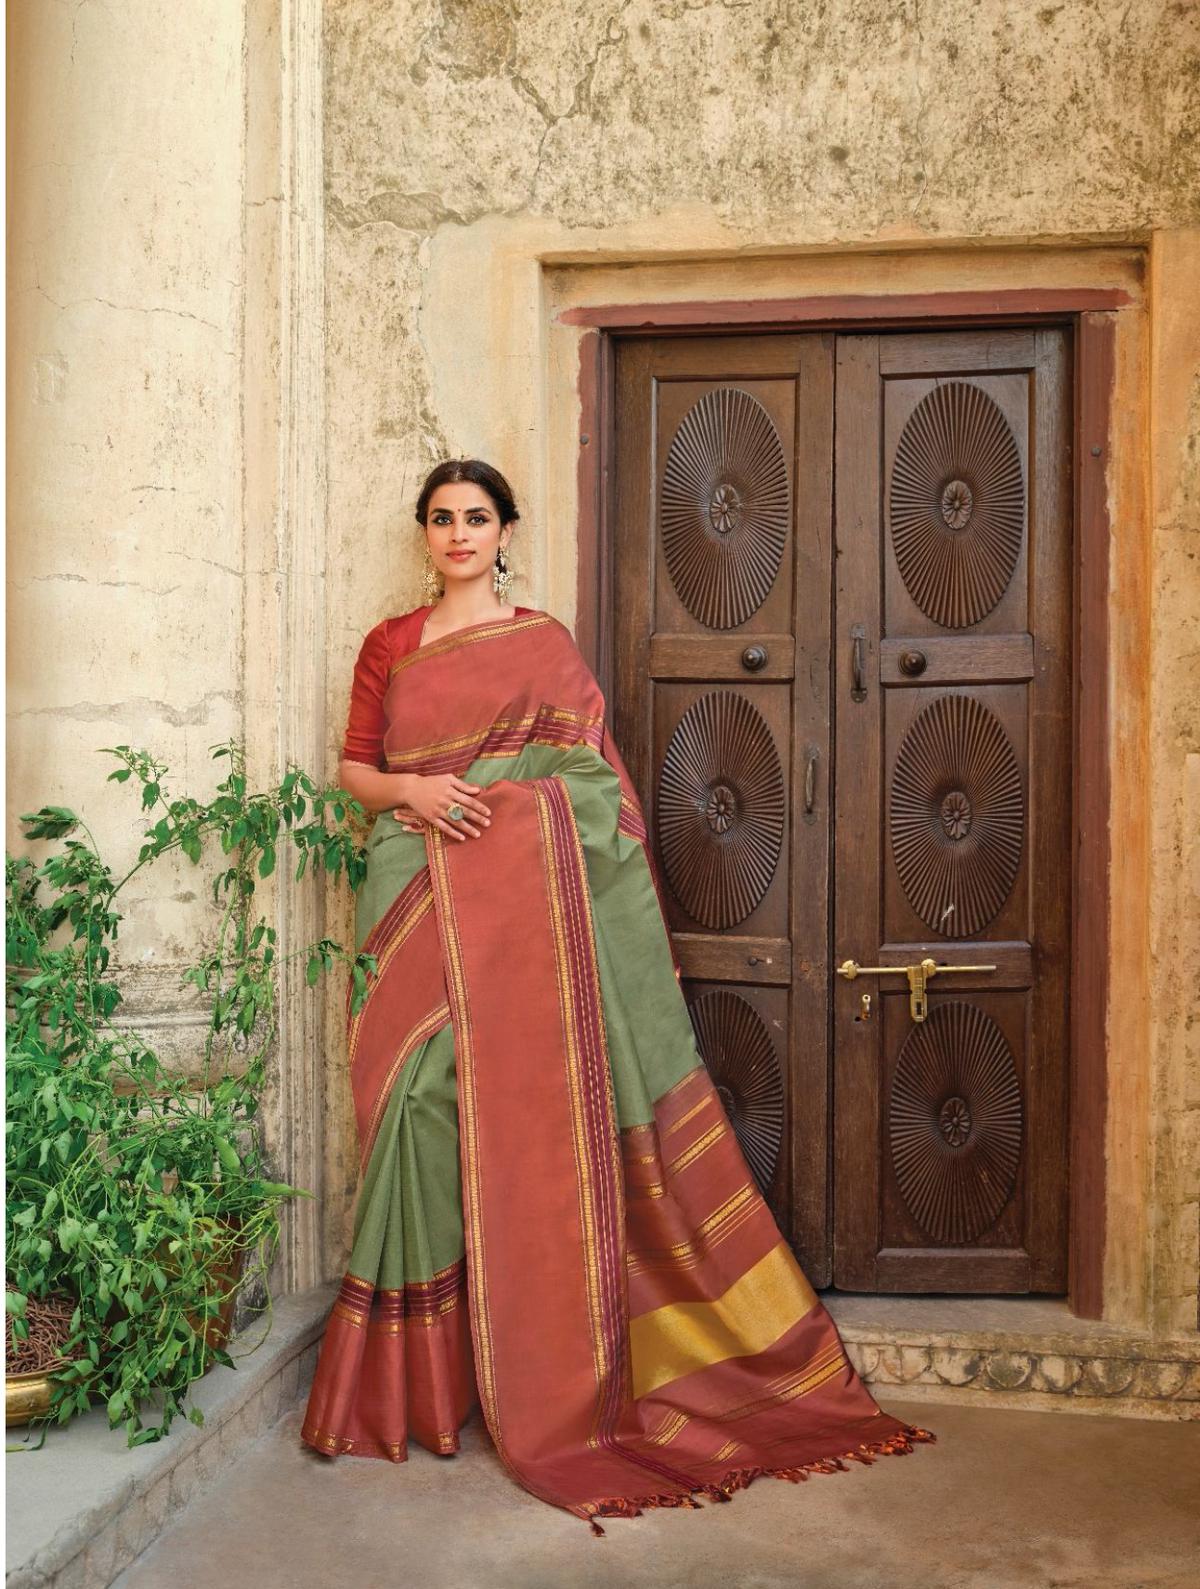 RmKV Silks has launched Naturals range of silk saris hand woven with natural dyed silk yarns